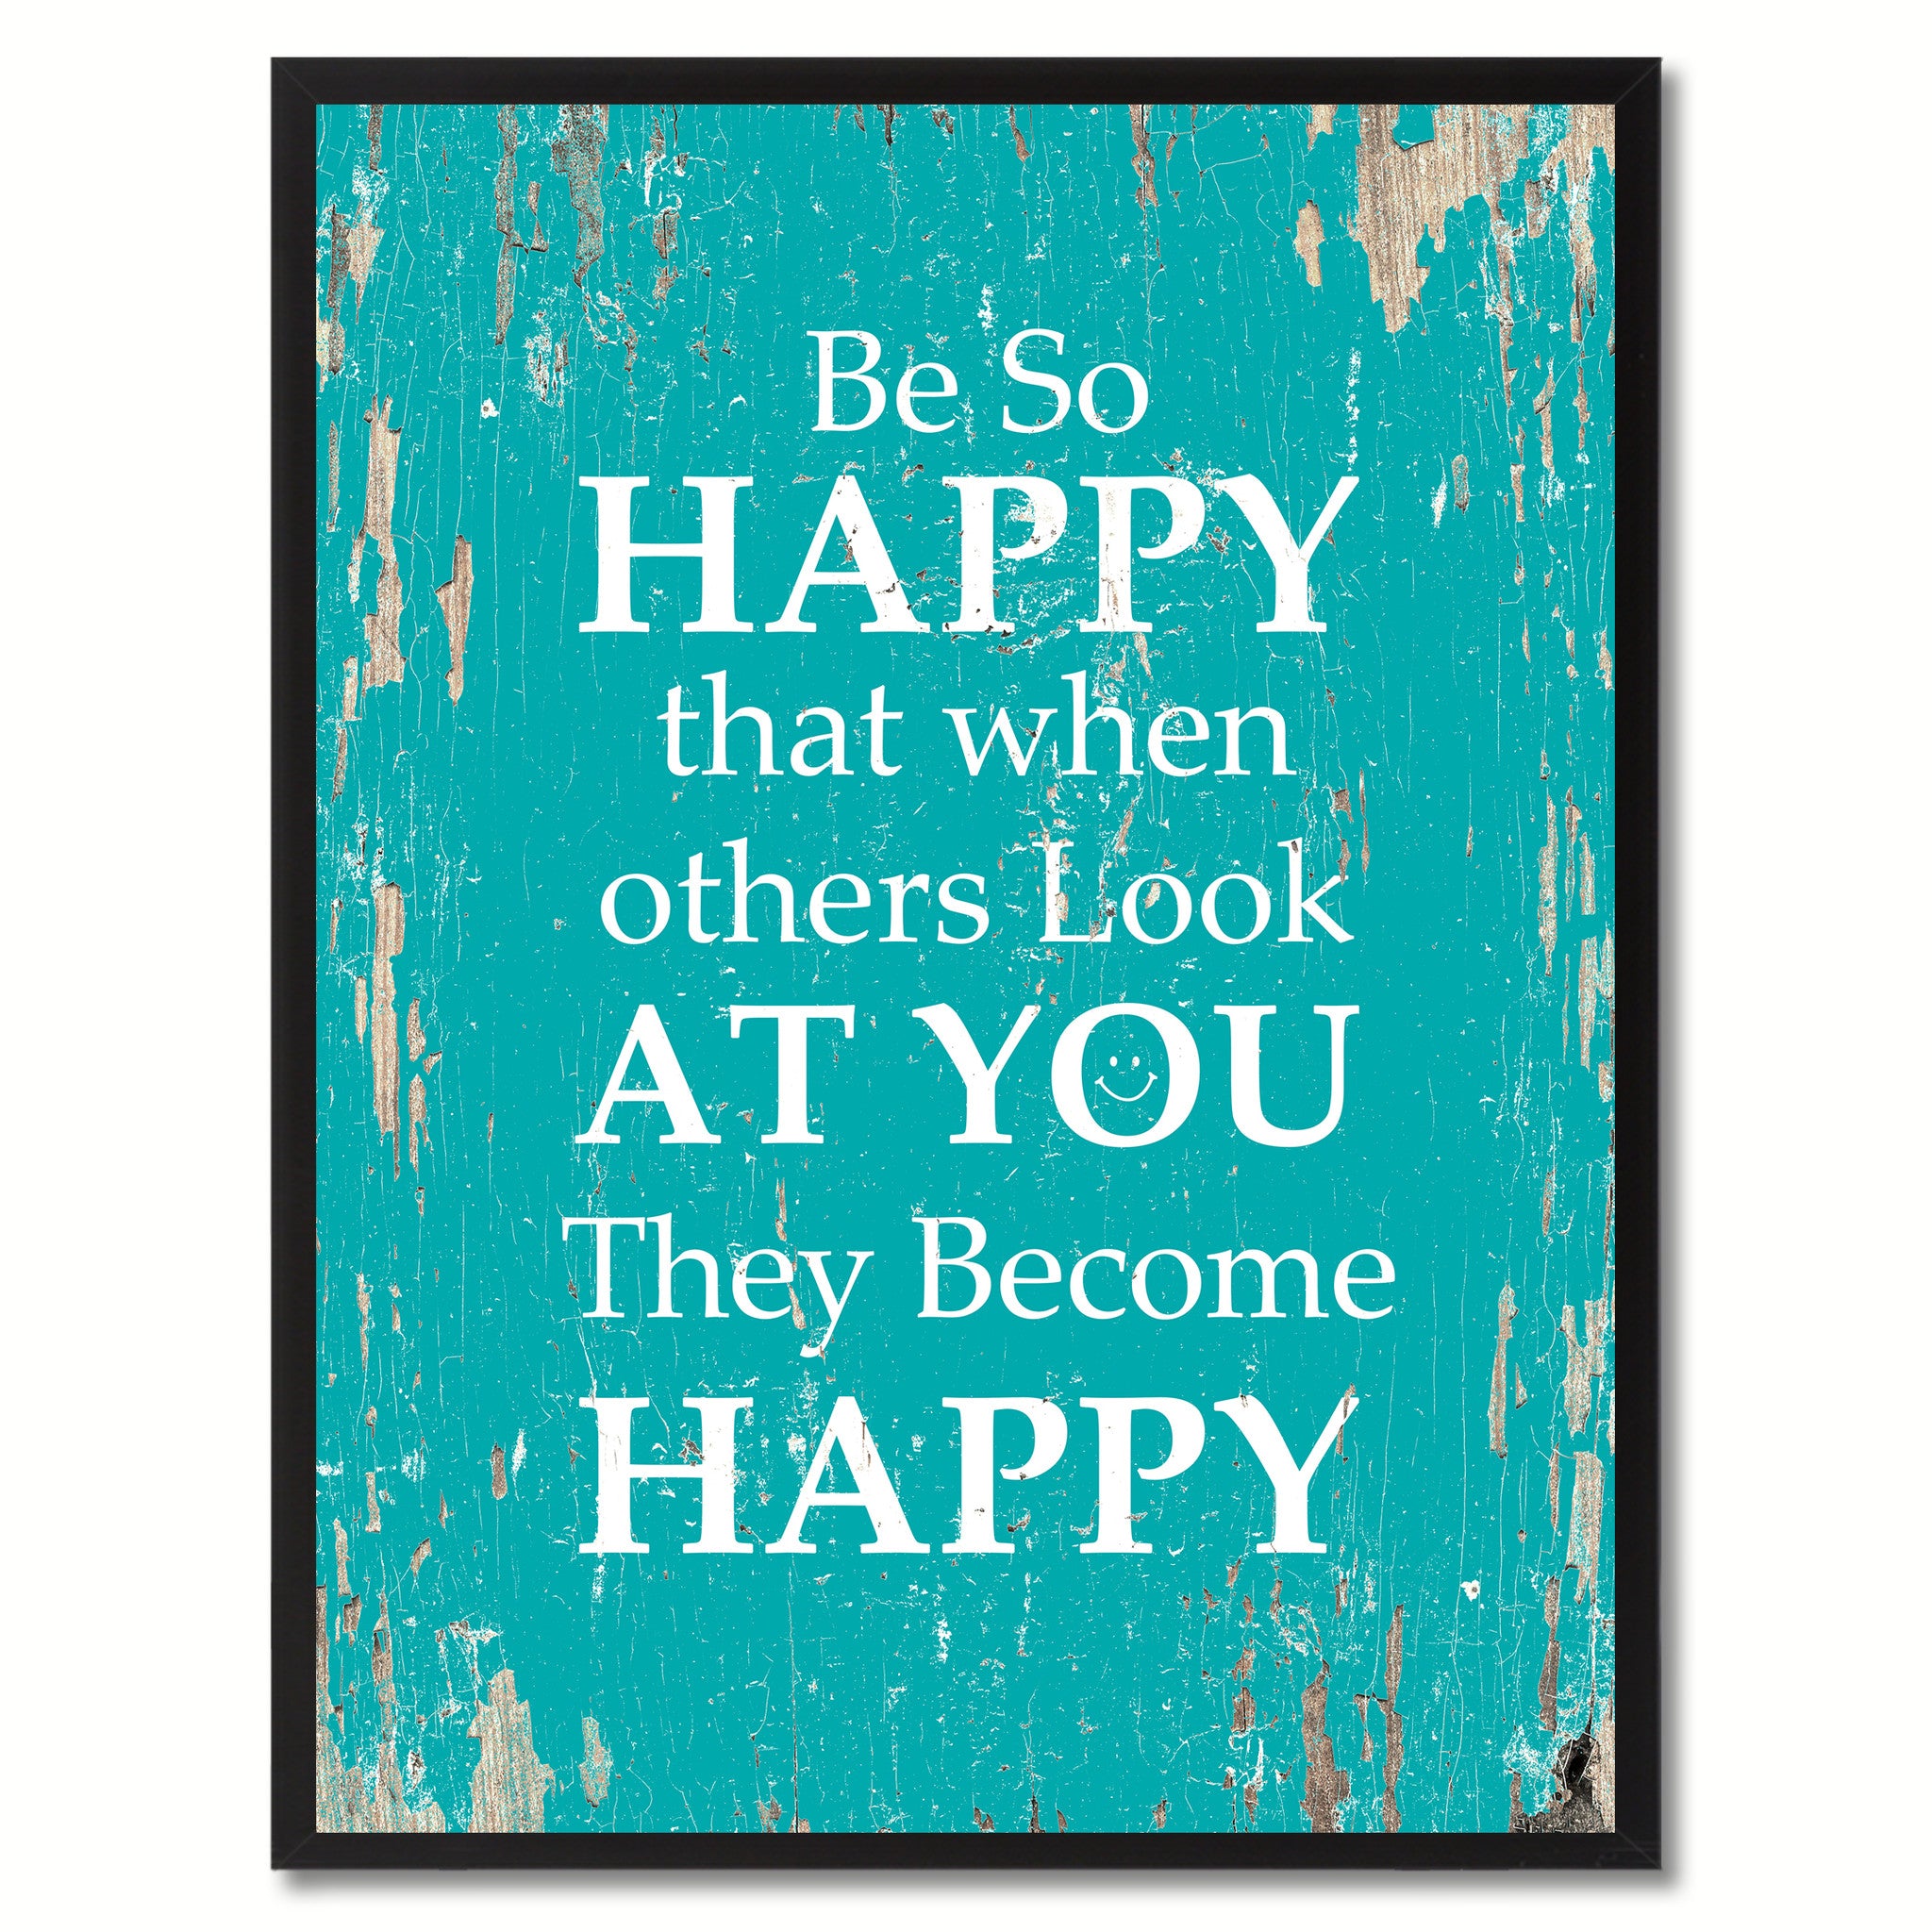 Be So Happy That When Others Look At You Saying Canvas Print, Black Picture Frame Home Decor Wall Art Gifts